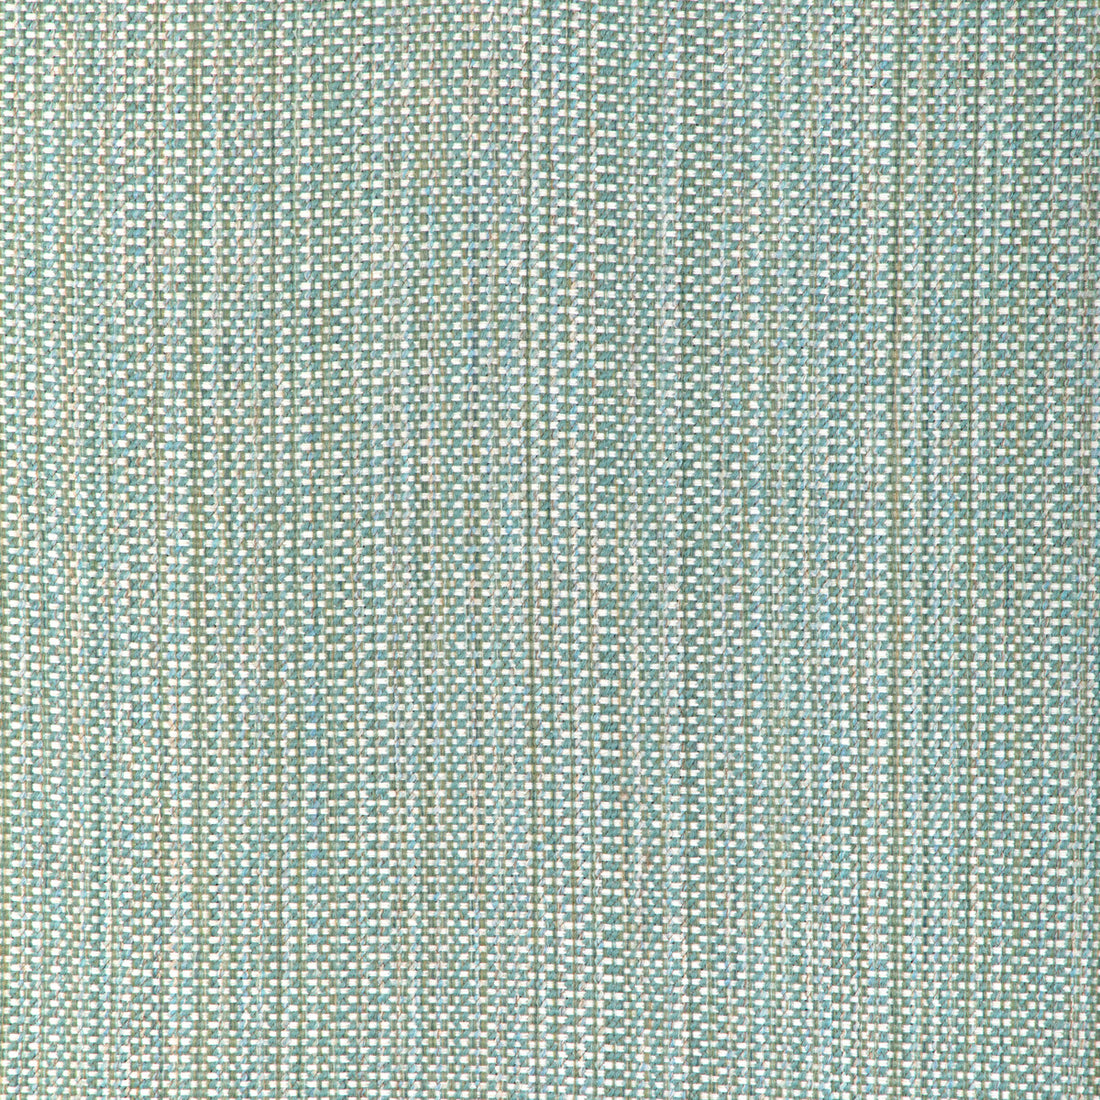 Kravet Smart fabric in 37018-1315 color - pattern 37018.1315.0 - by Kravet Smart in the Gis collection